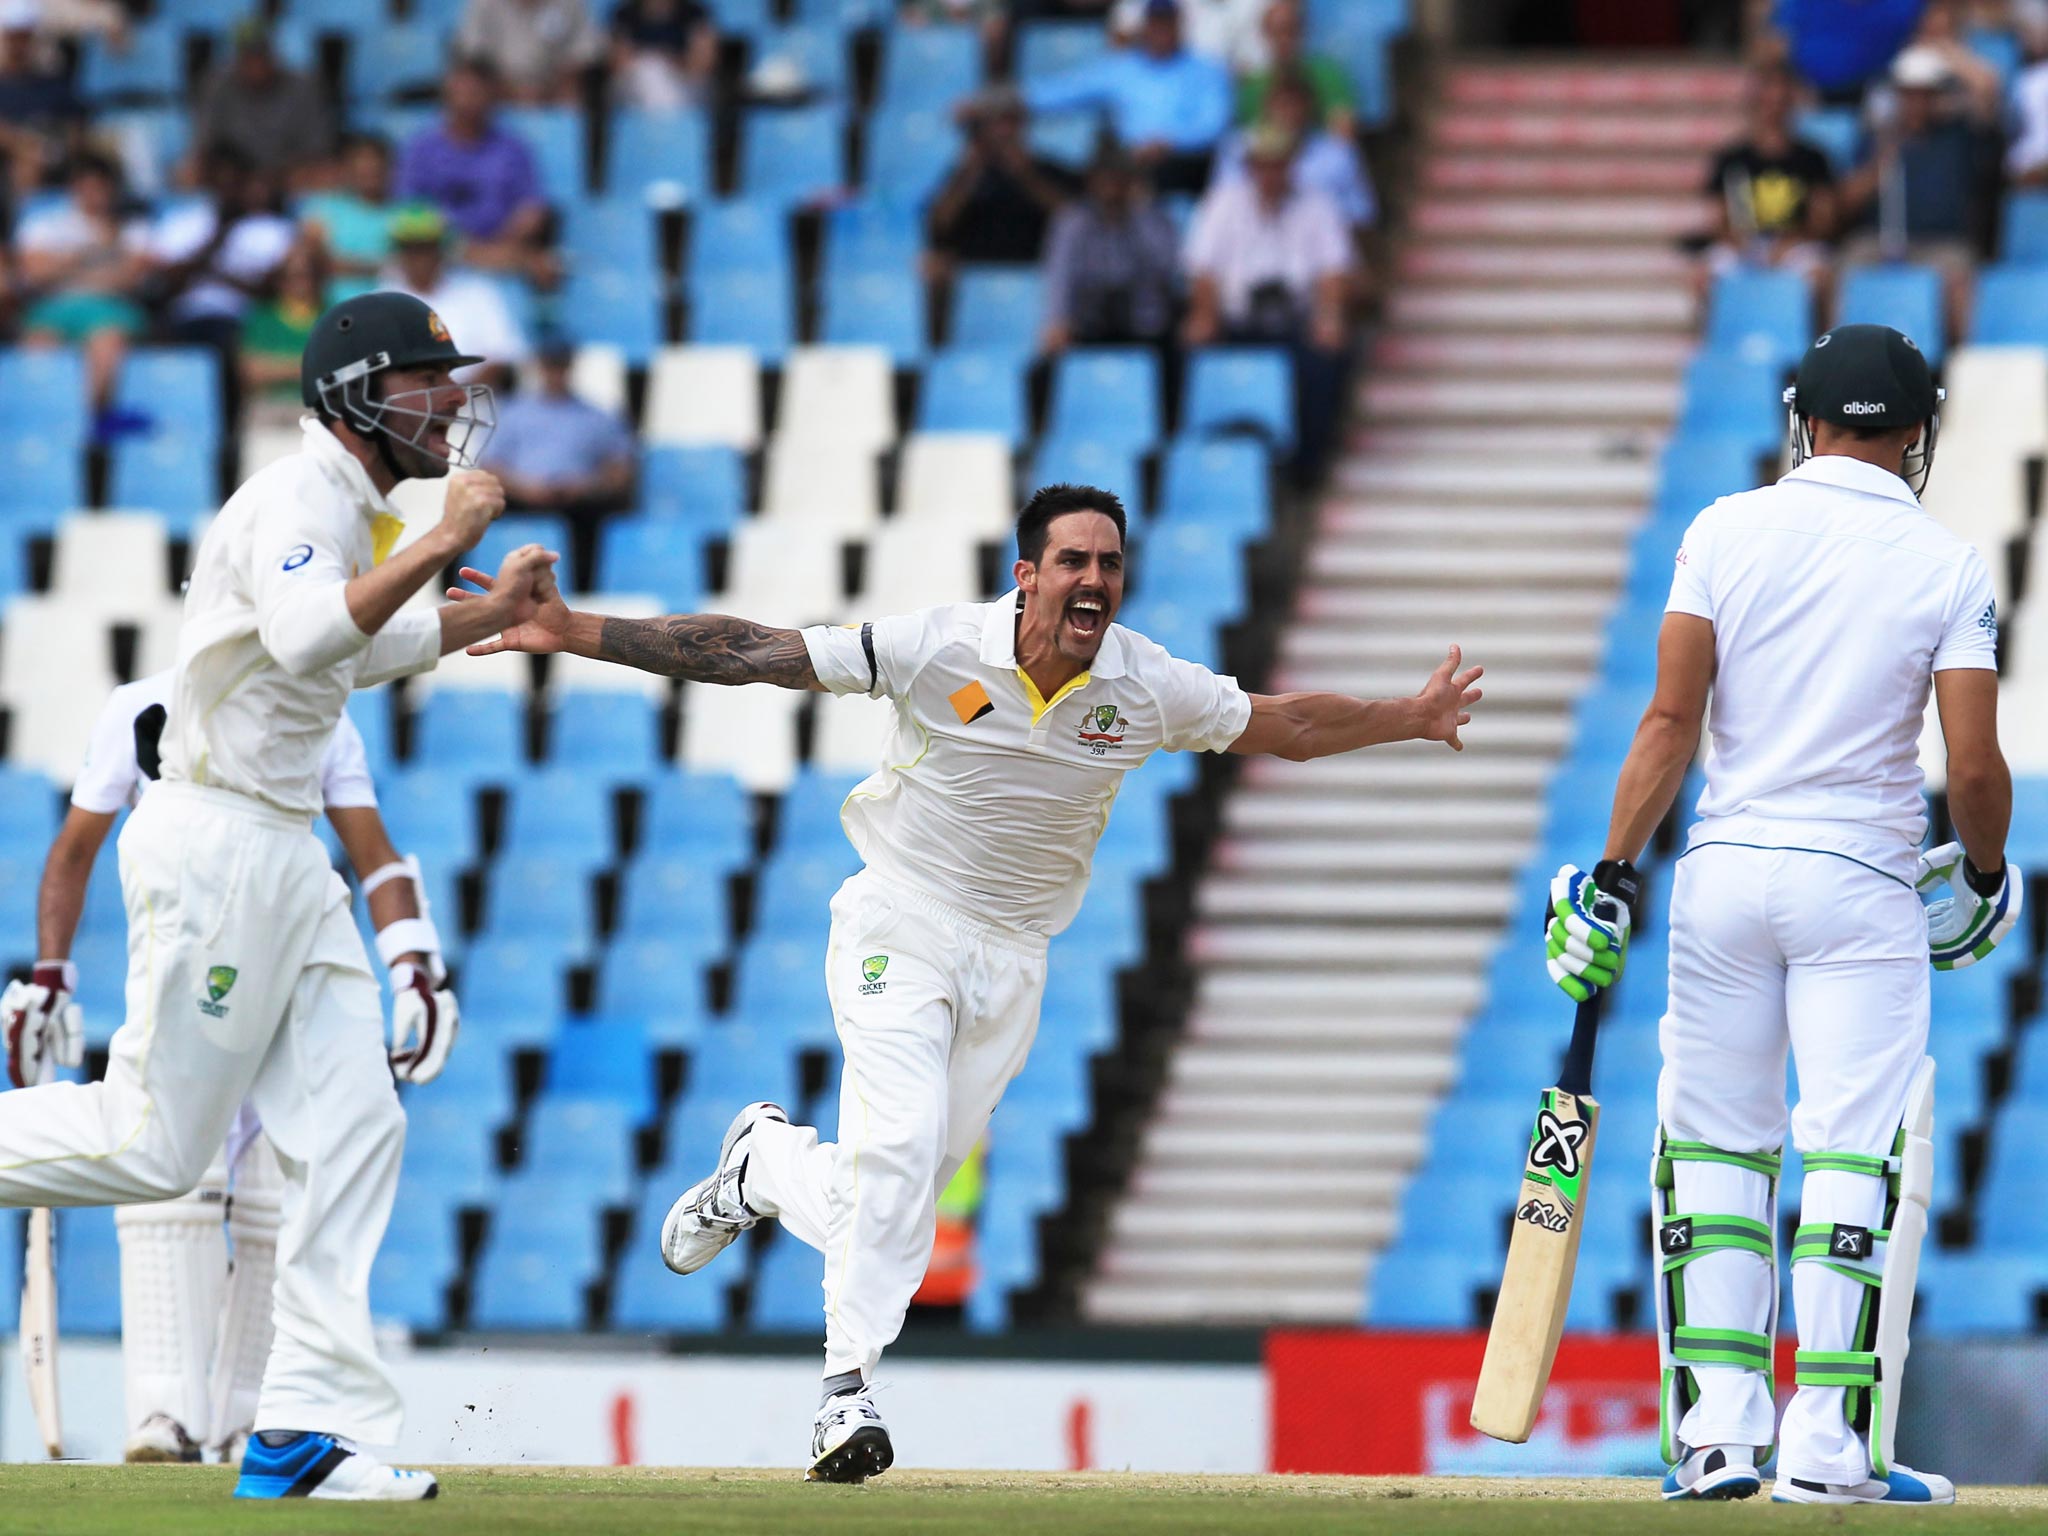 Mitchell Johnson celebrates taking the wicket of Faf du Plessis with a 93mph delivery